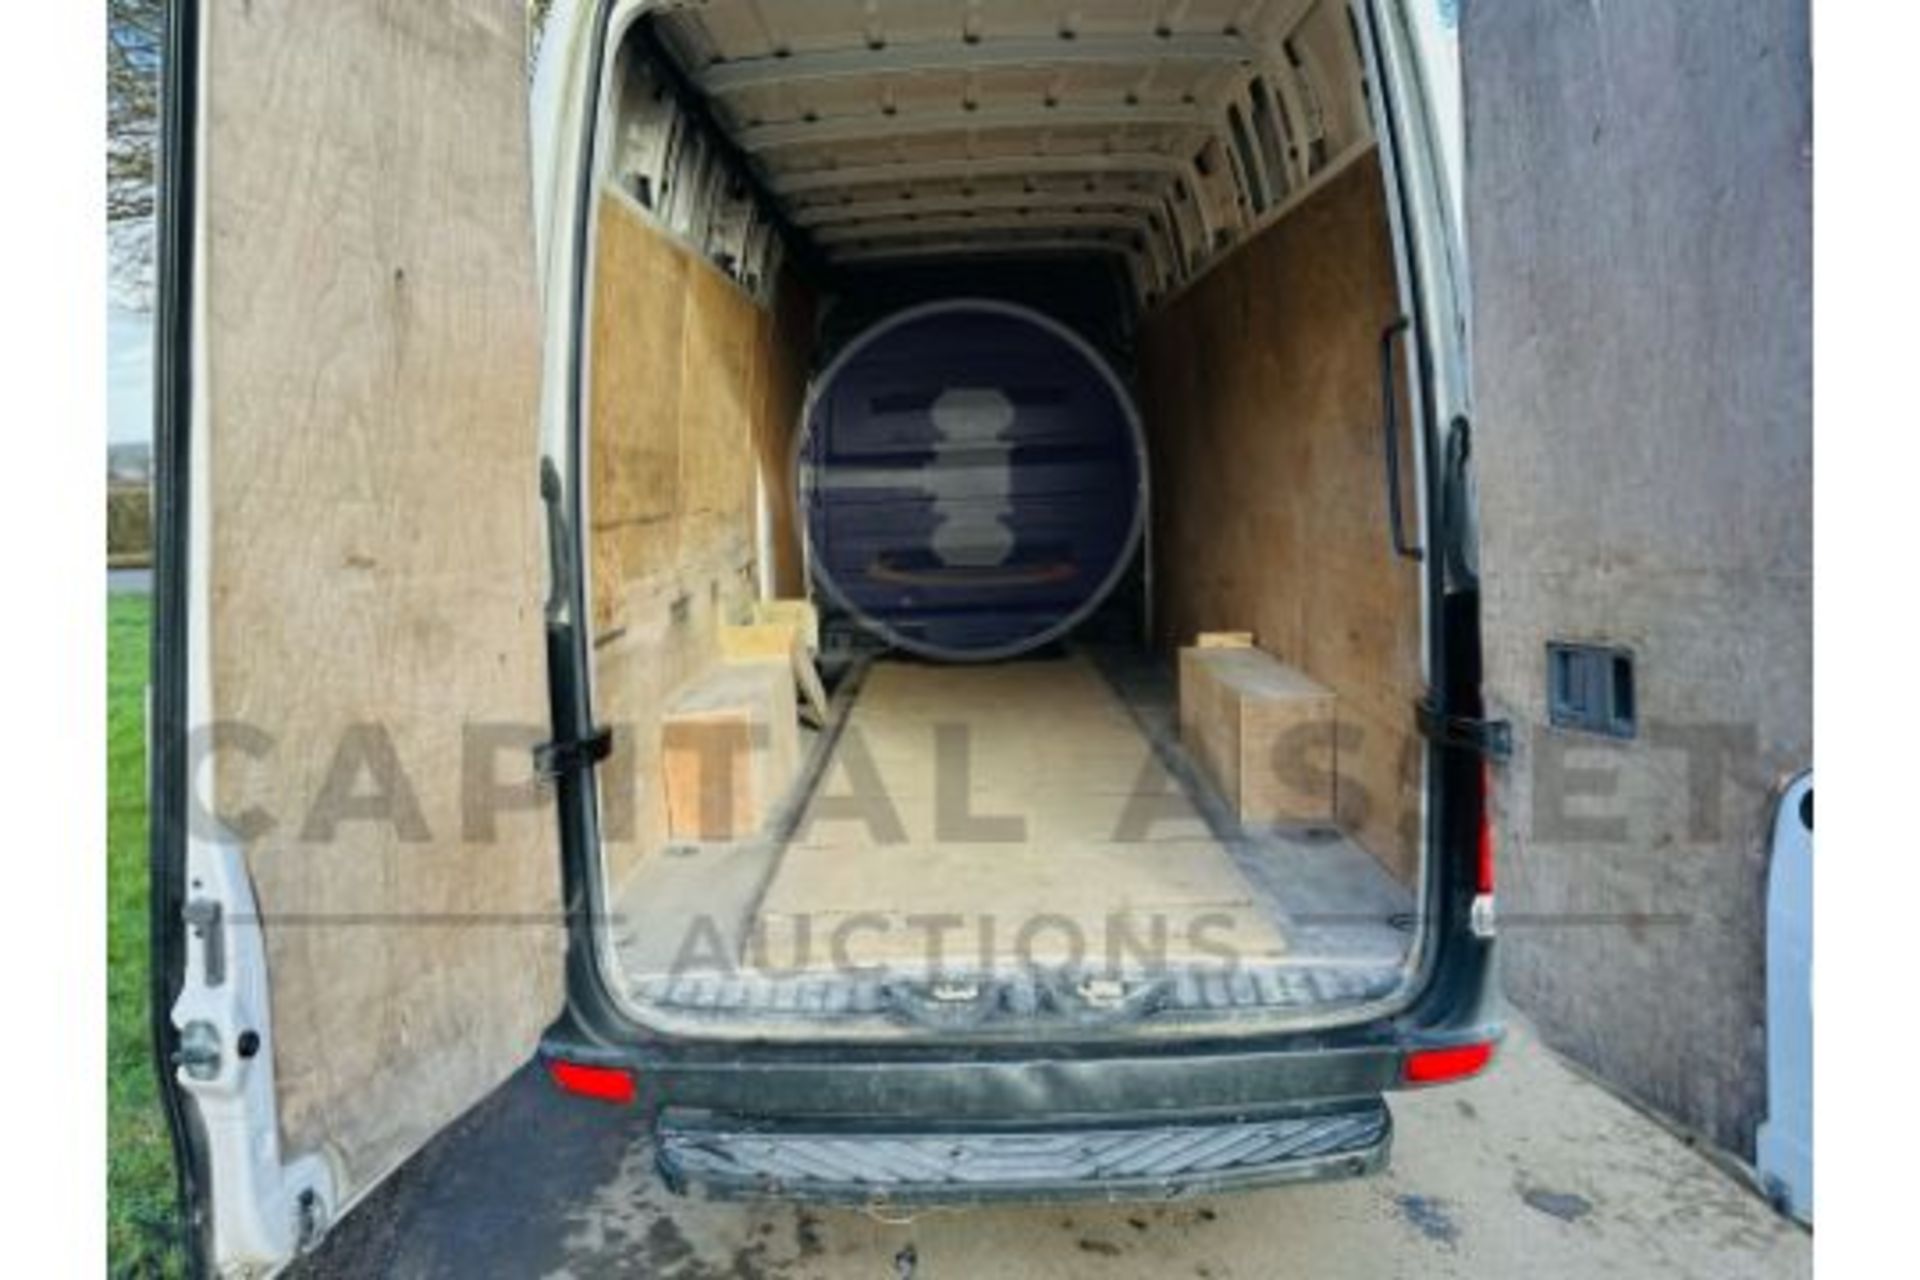 (ON SALE) VOLKSWAGEN CRAFTER 2.0TDI (140) LONG WHEEL BASE - 2017 REG - EURO 6 - AIR CON - LOOK!! - Image 10 of 31